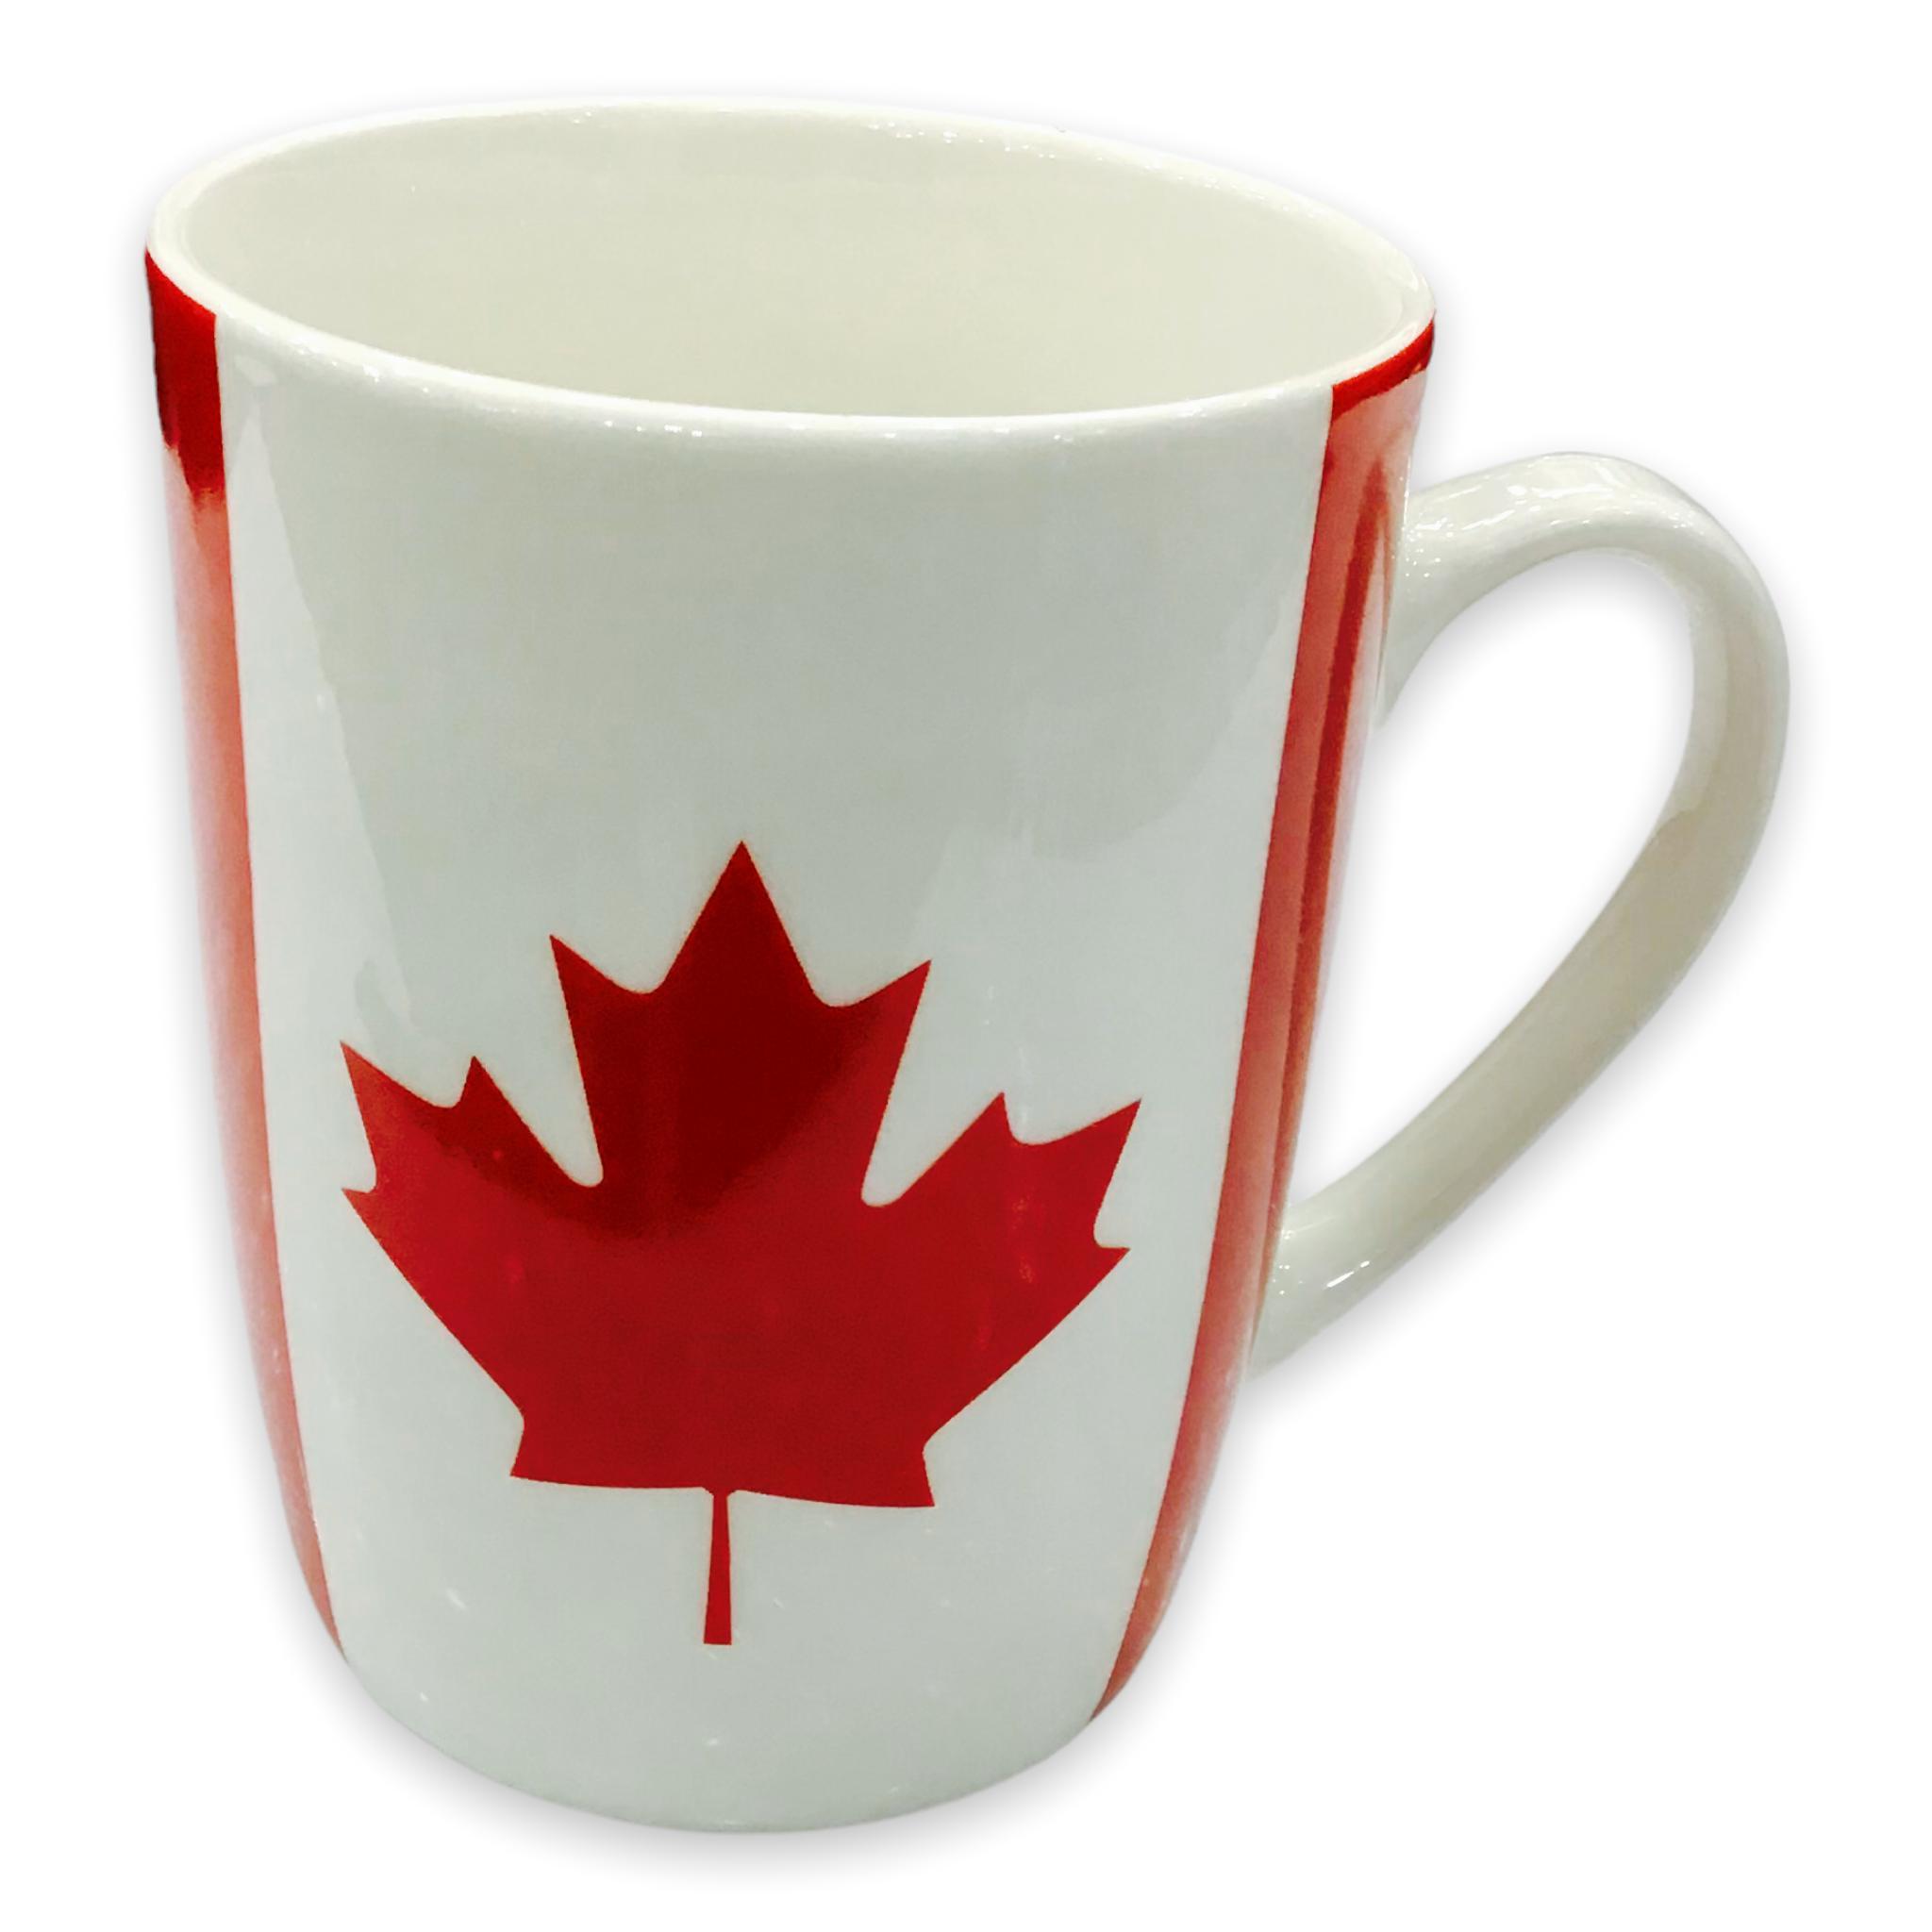 Canadian National Flag Themed Mug - Red and White 13oz Canada Ceramic Coffee Cup